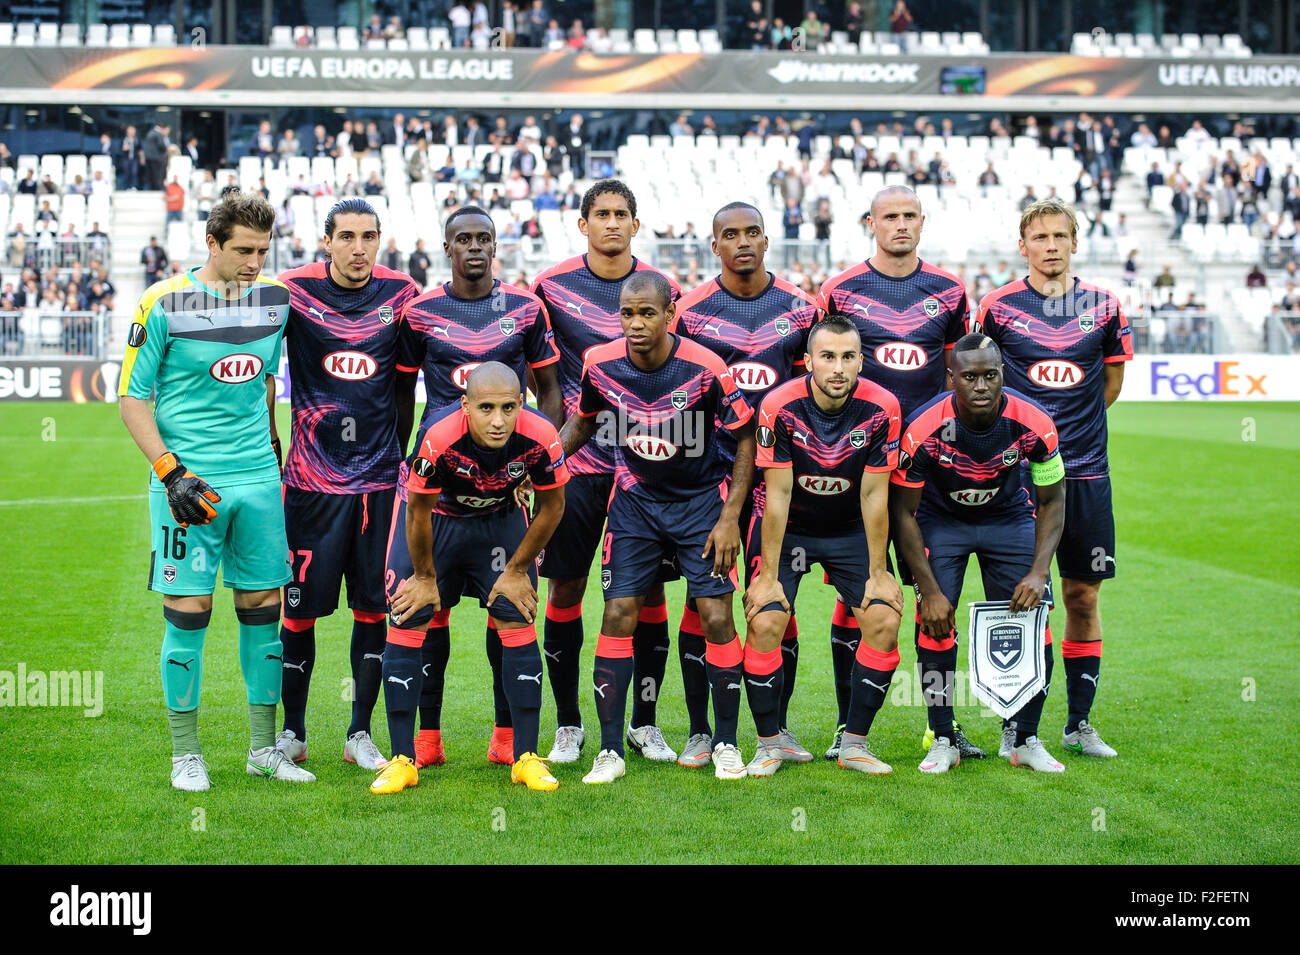 Fc Bordeaux High Resolution Stock Photography and Images - Alamy